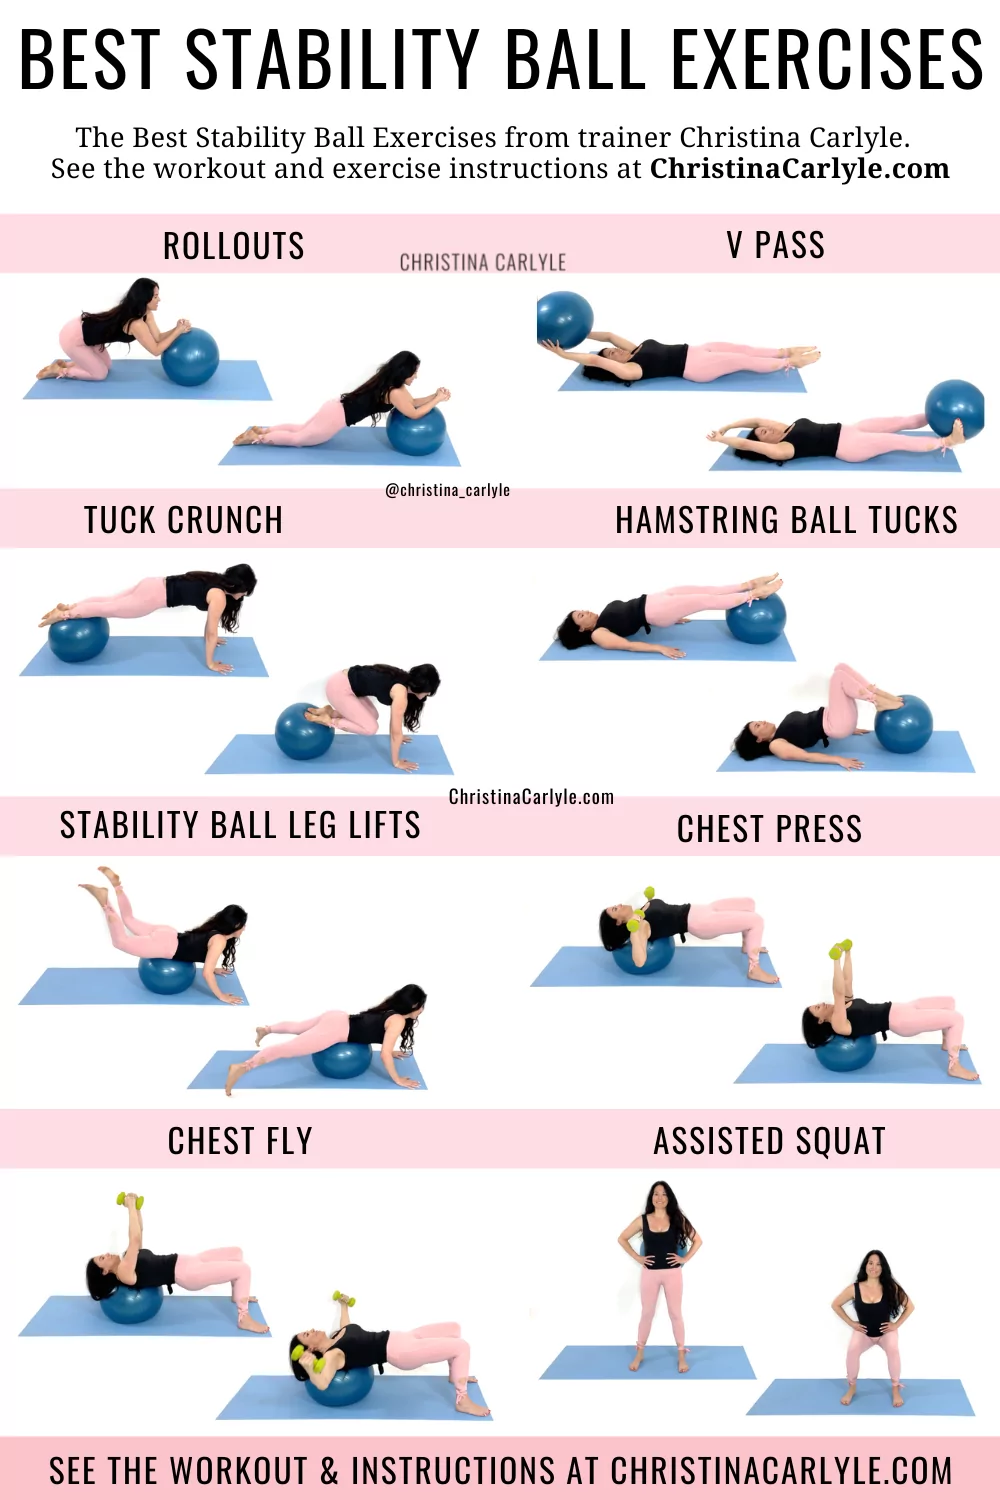 Stability Ball Workout for Beginners & Seniors // Fun Exercises